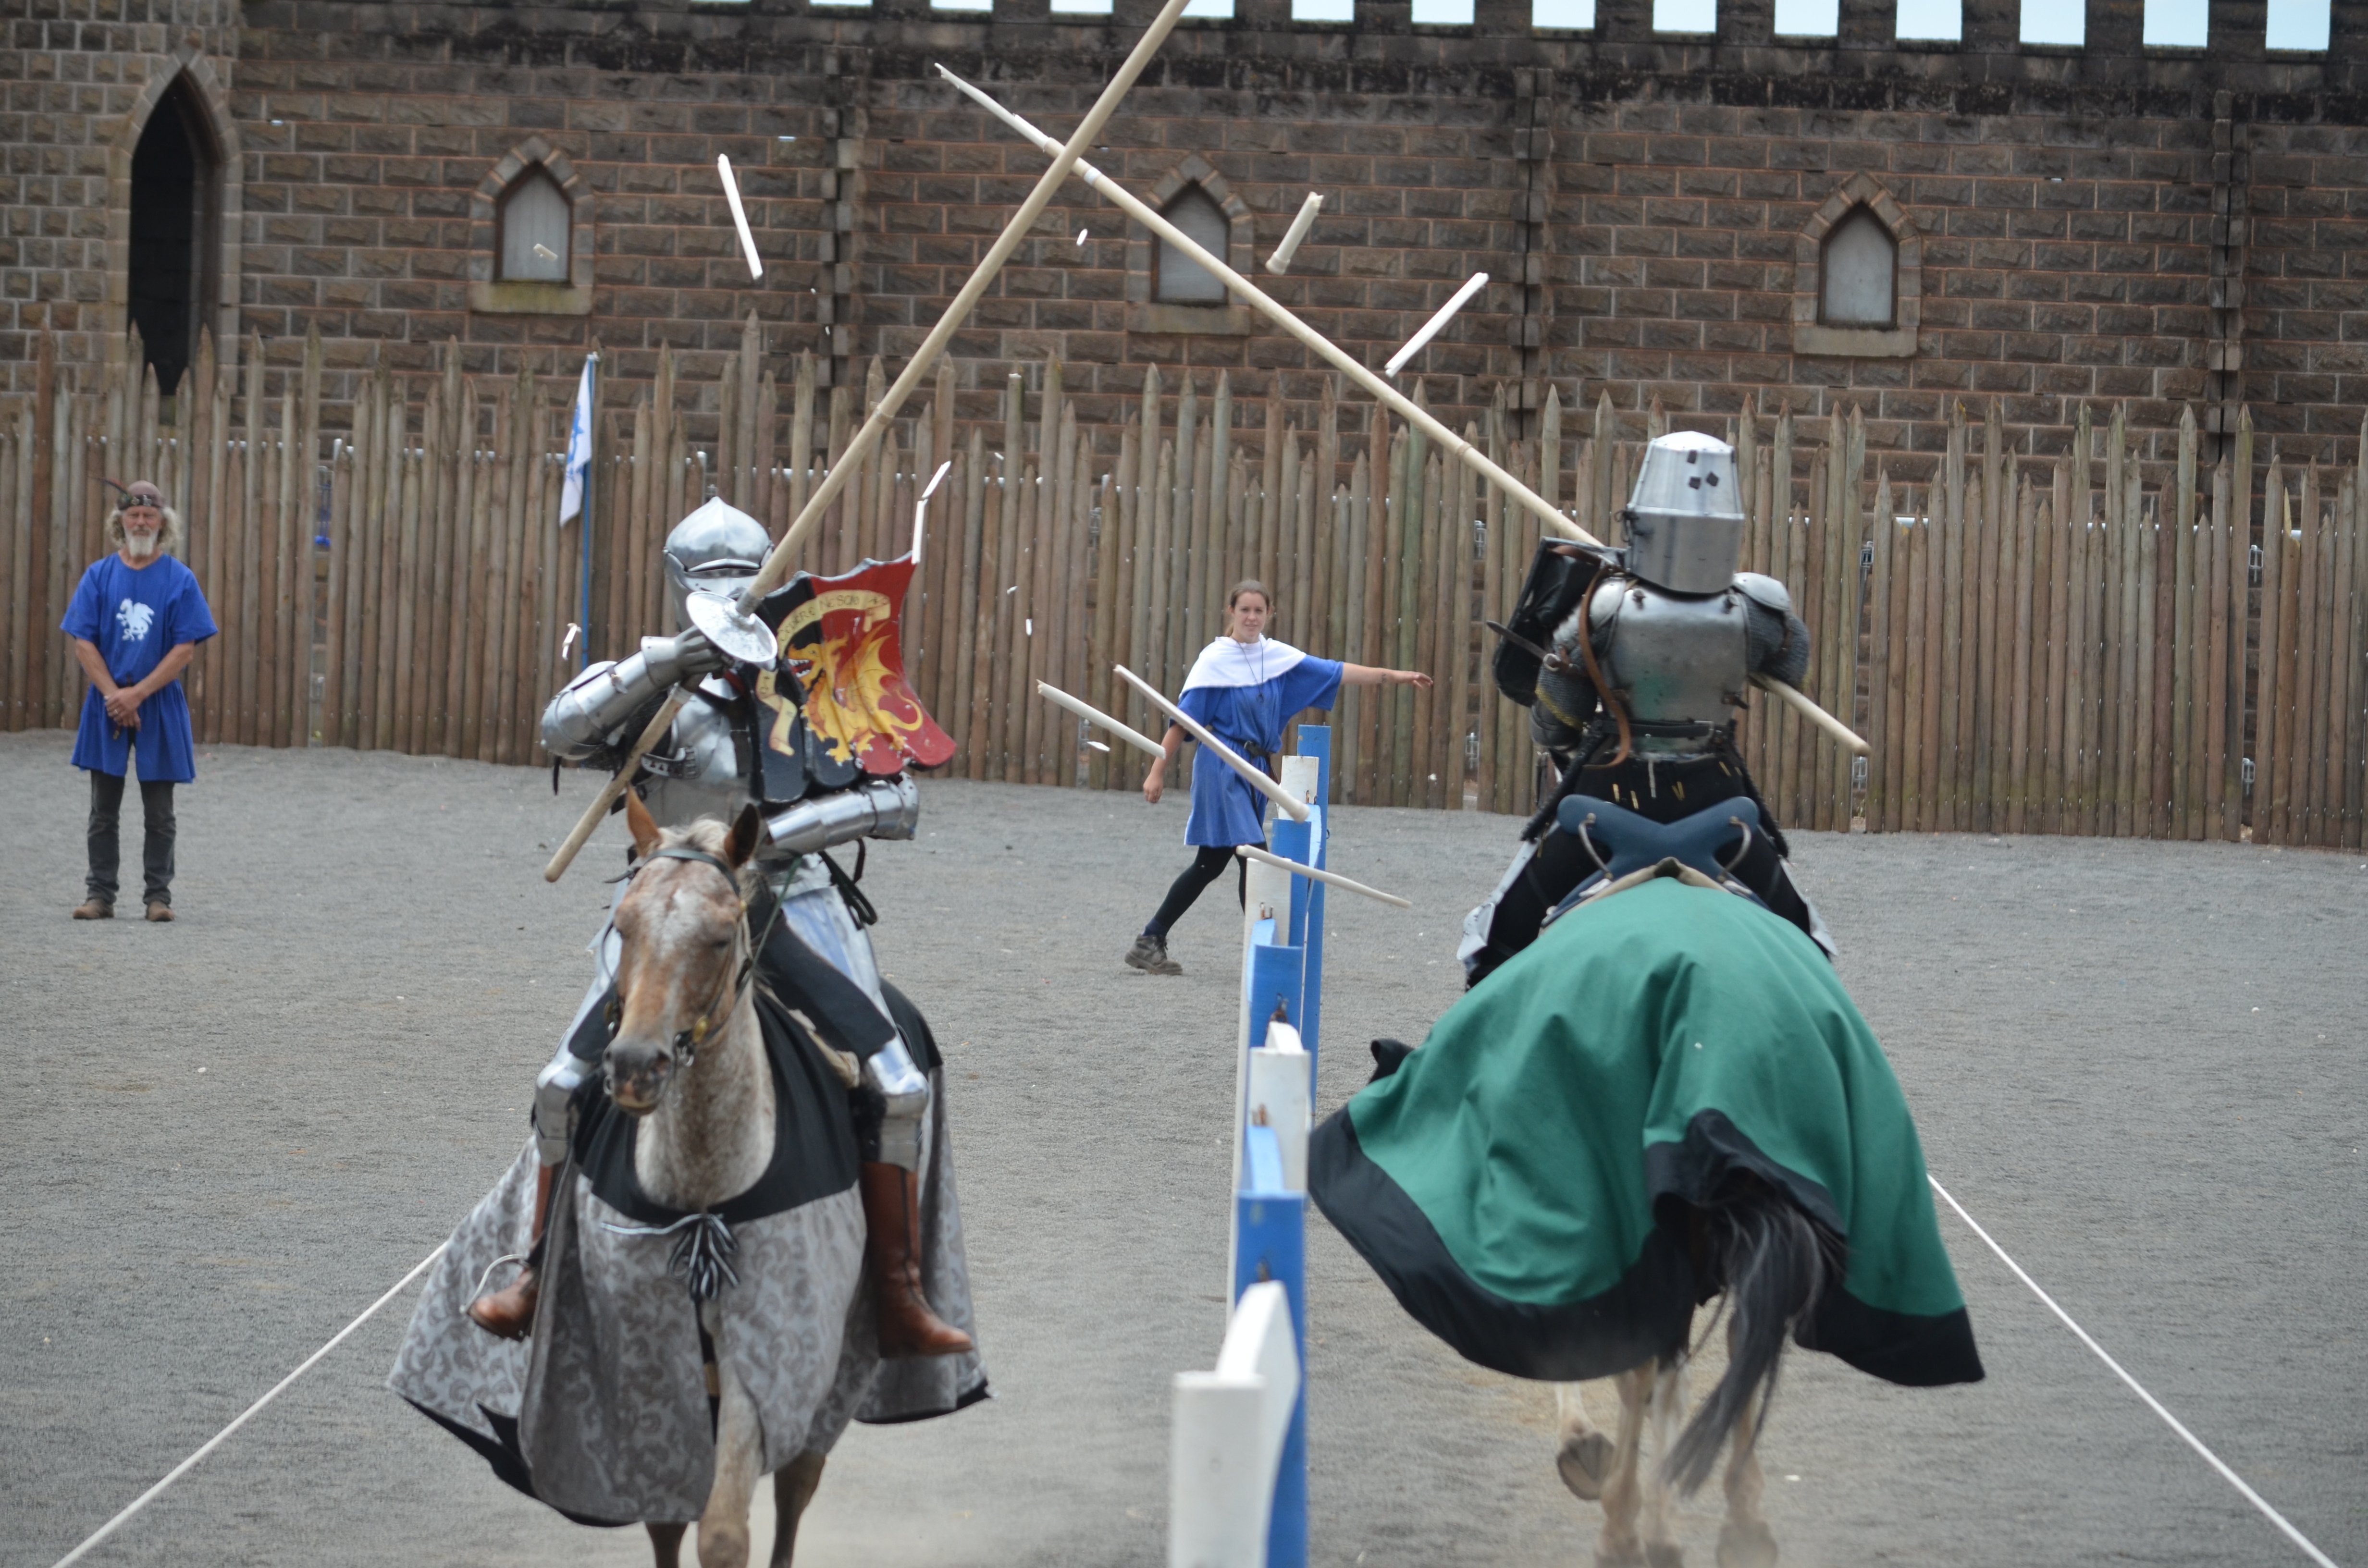 Fancy a joust? A medieval demonstration on the way to Tarago Show